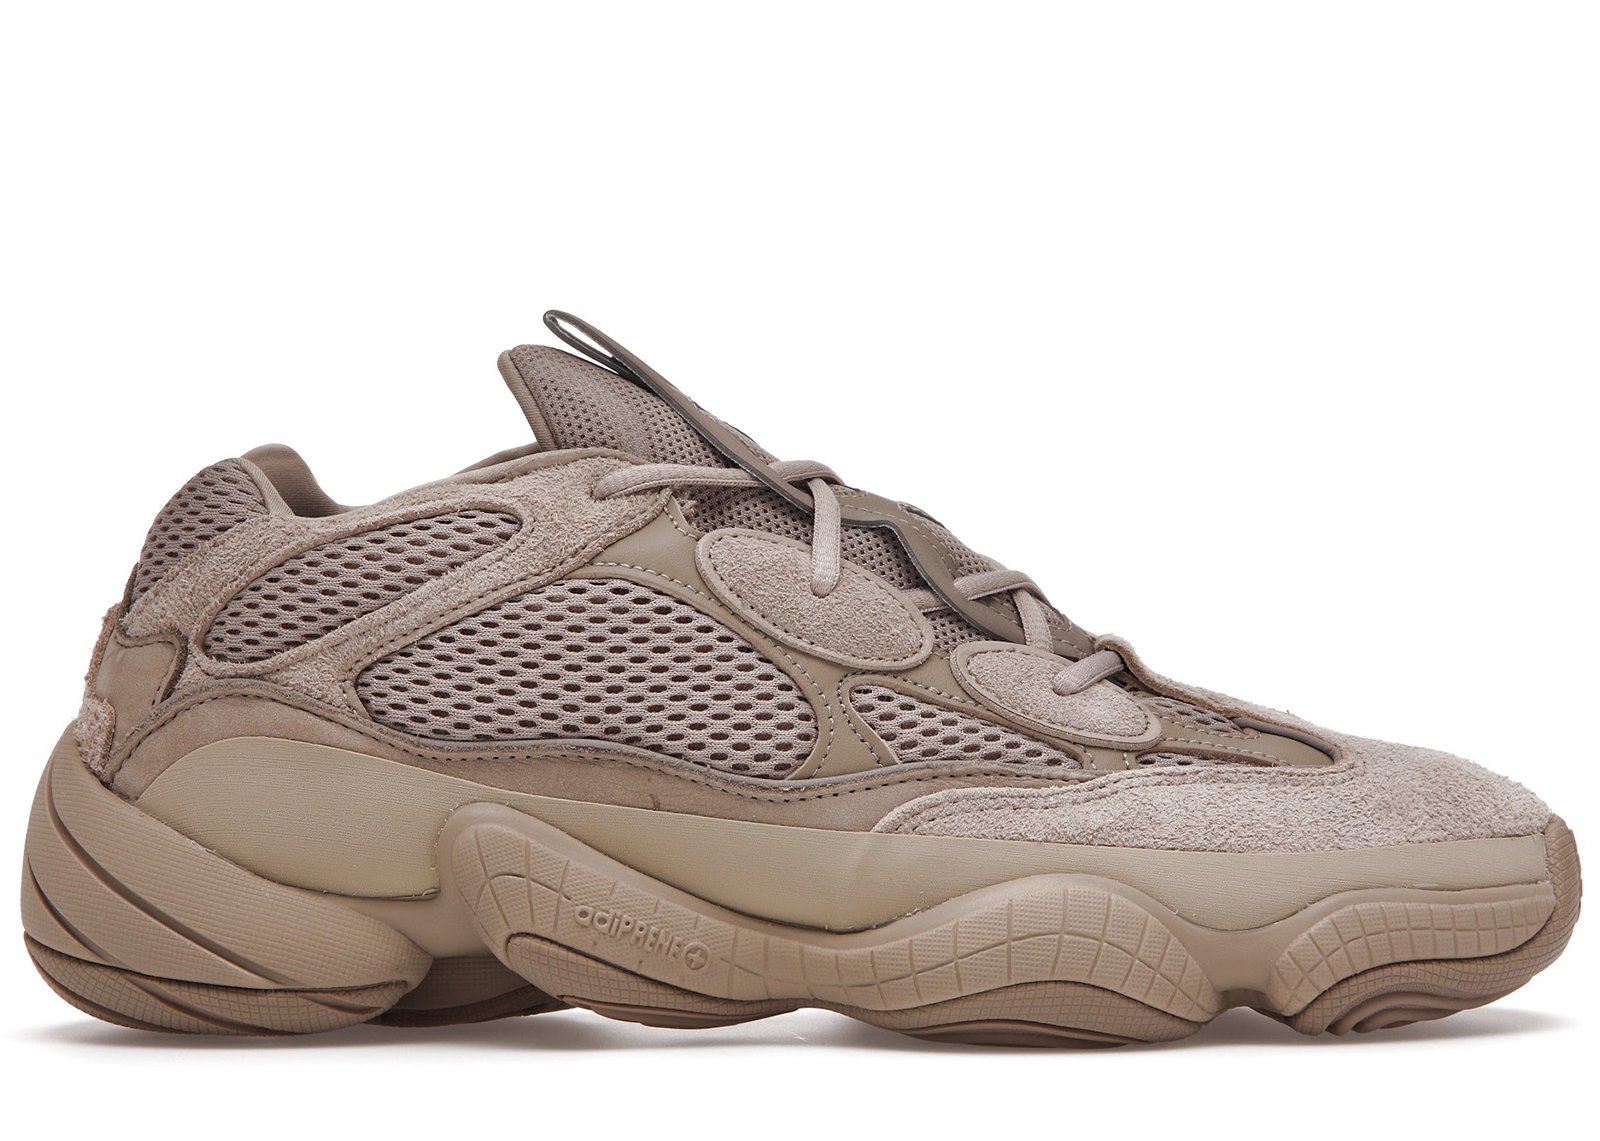 adidas Yeezy 500 Taupe Light sneakers